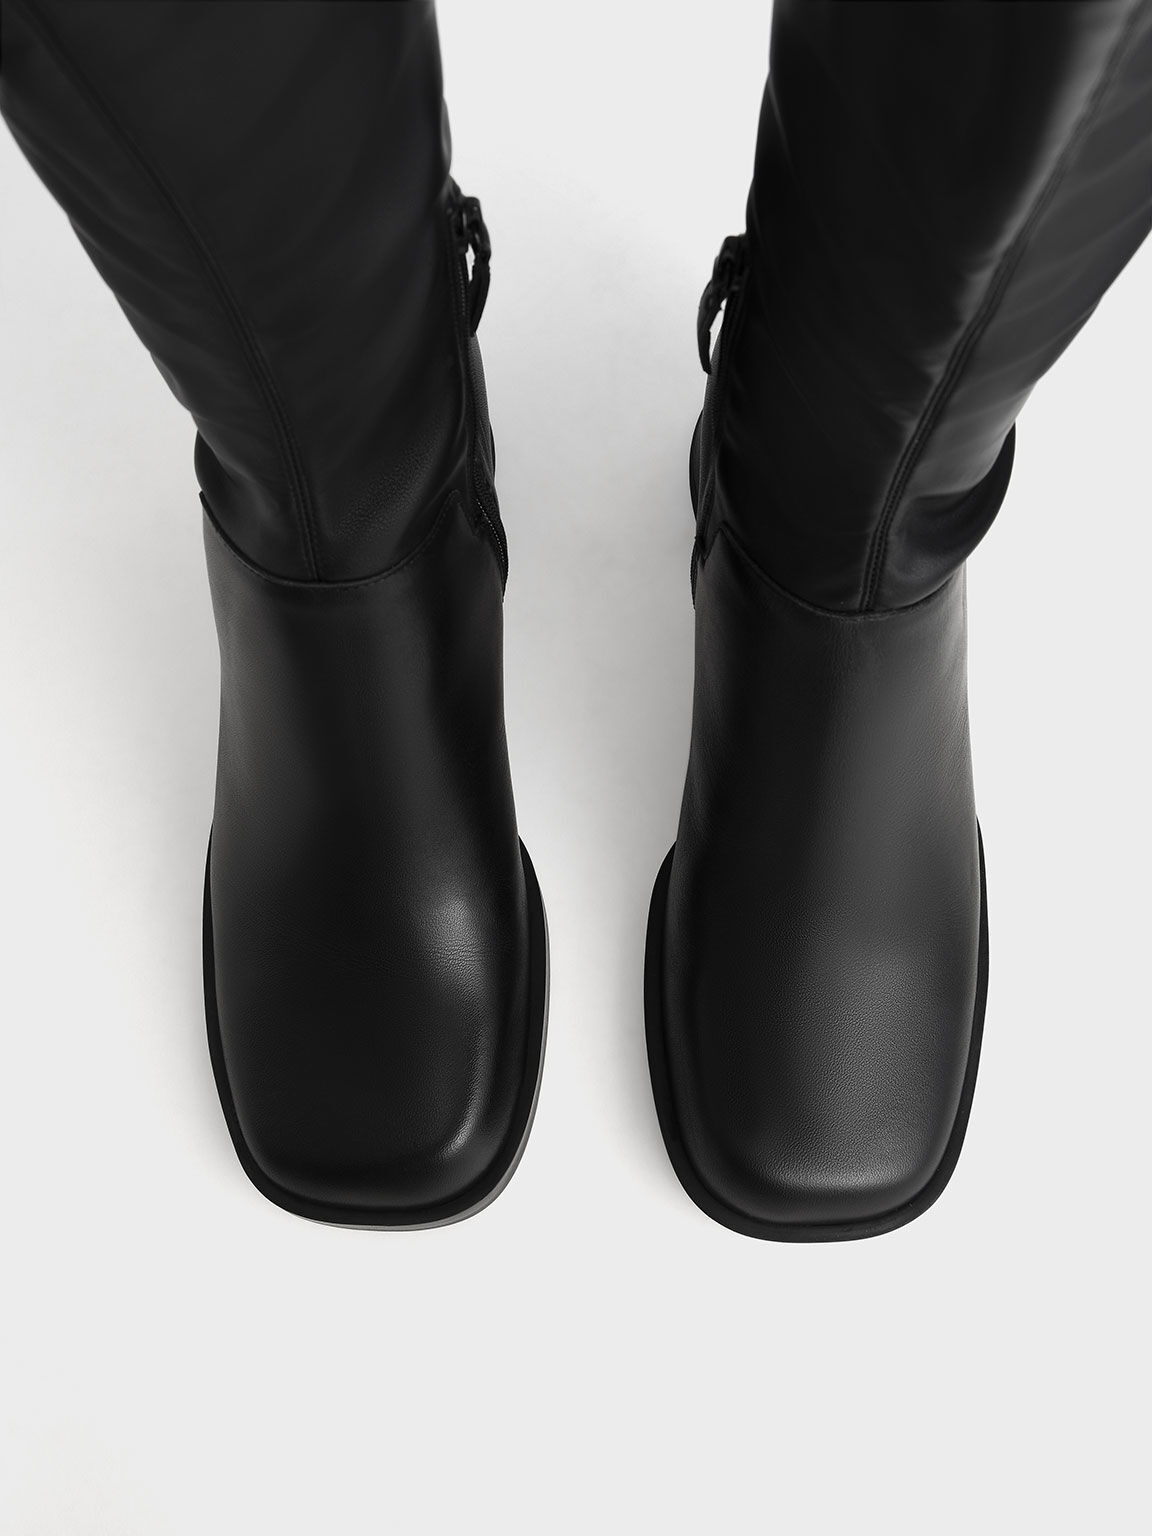 Leather Knee-High Boots, Black, hi-res